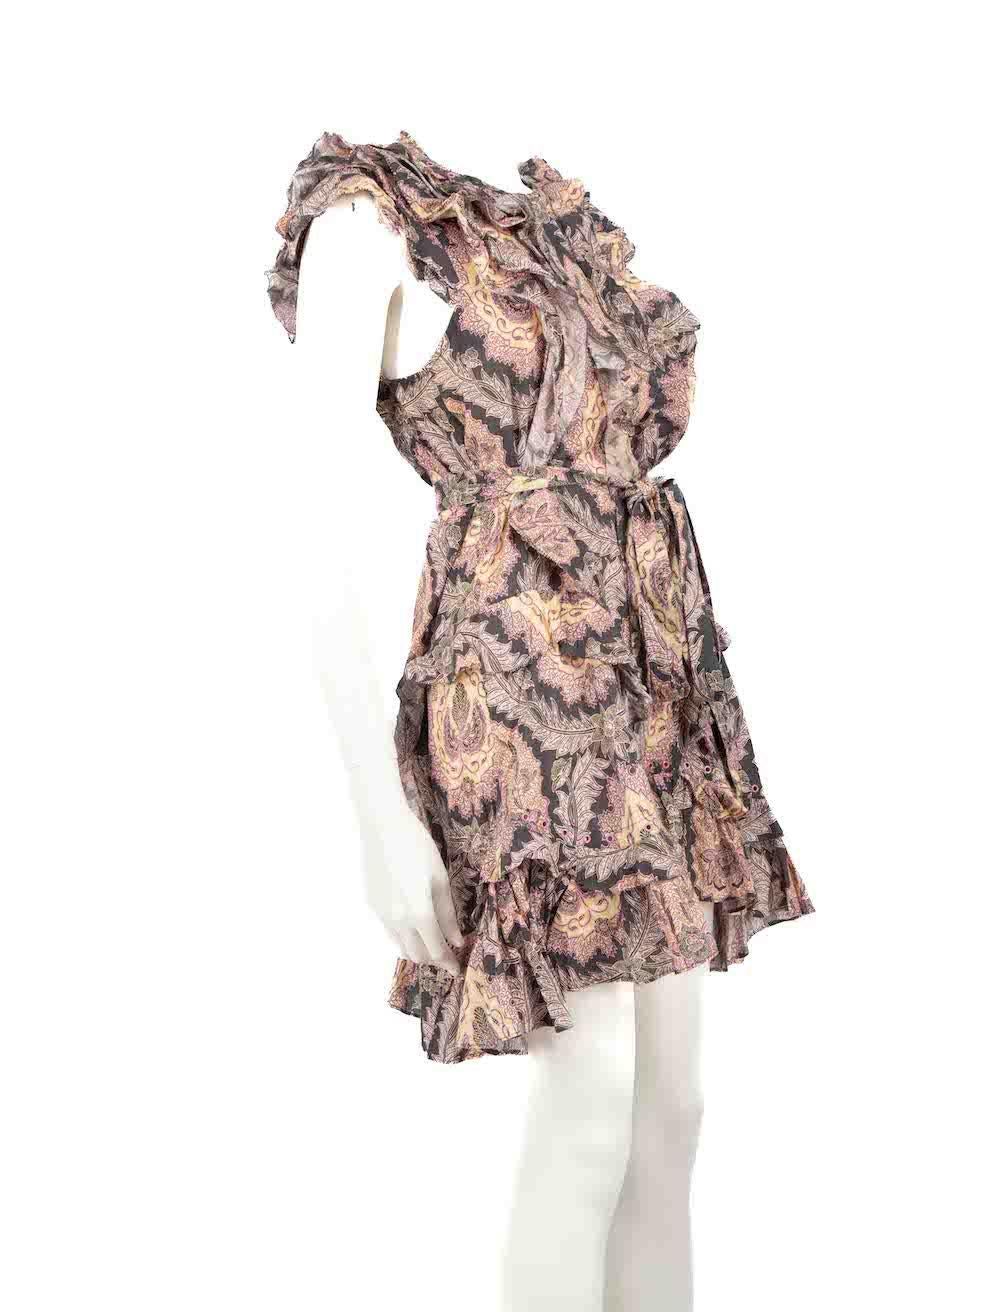 CONDITION is Very good. Hardly any visible wear to dress is evident on this used Isabel Marant designer resale item.
 
 
 
 Details
 
 
 Multicolour- black, yellow, pink
 
 Cotton
 
 Dress
 
 Floral print
 
 Sleeveless
 
 Knee length
 
 Ruffle trim
